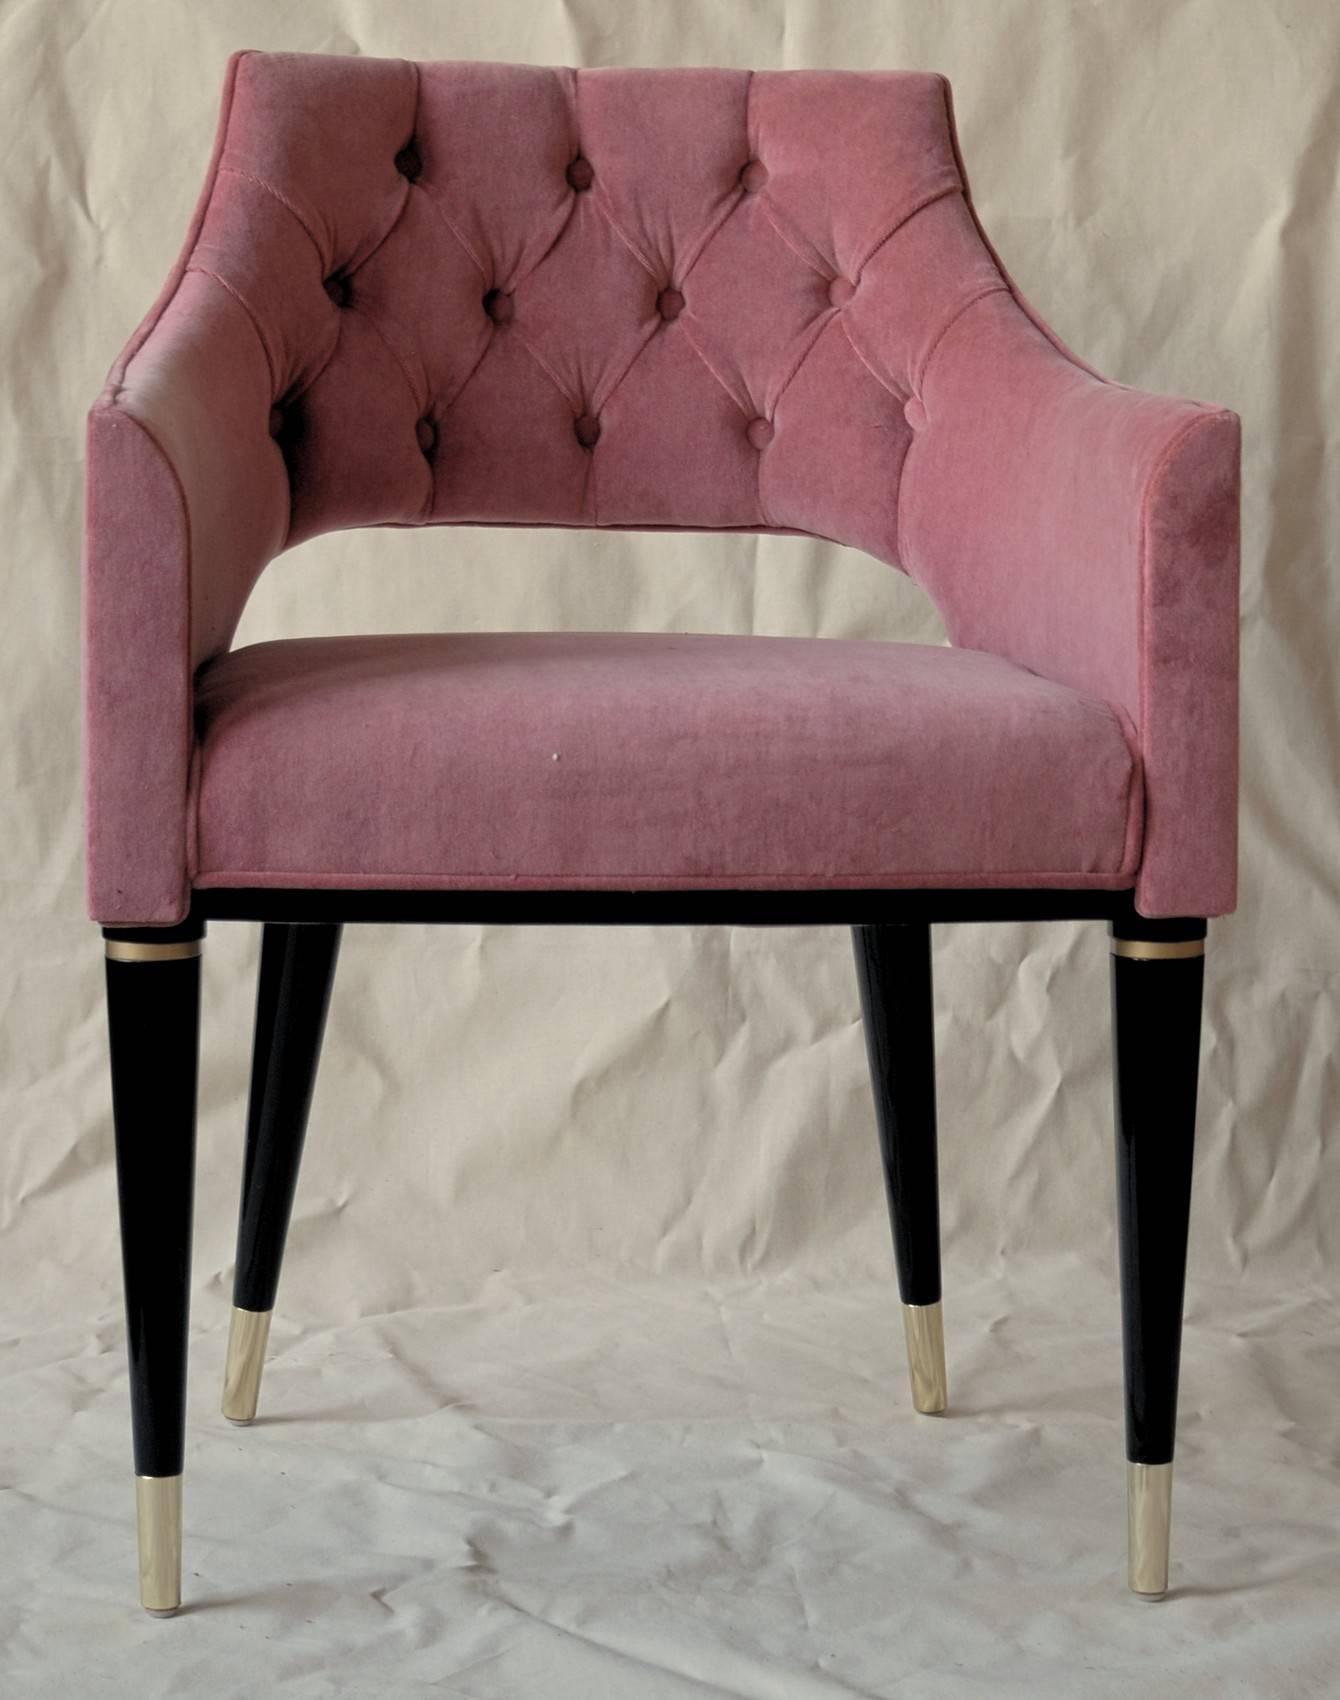 Superb midcentury style chair. Set of eight made with beautiful tuberose rose velvet. 

Restauration grade finishing and upholstering. Metal ring and fittings.
Extremely comfortable and chic. Luxury details.
Tuscan woven cotton 50% and polyester